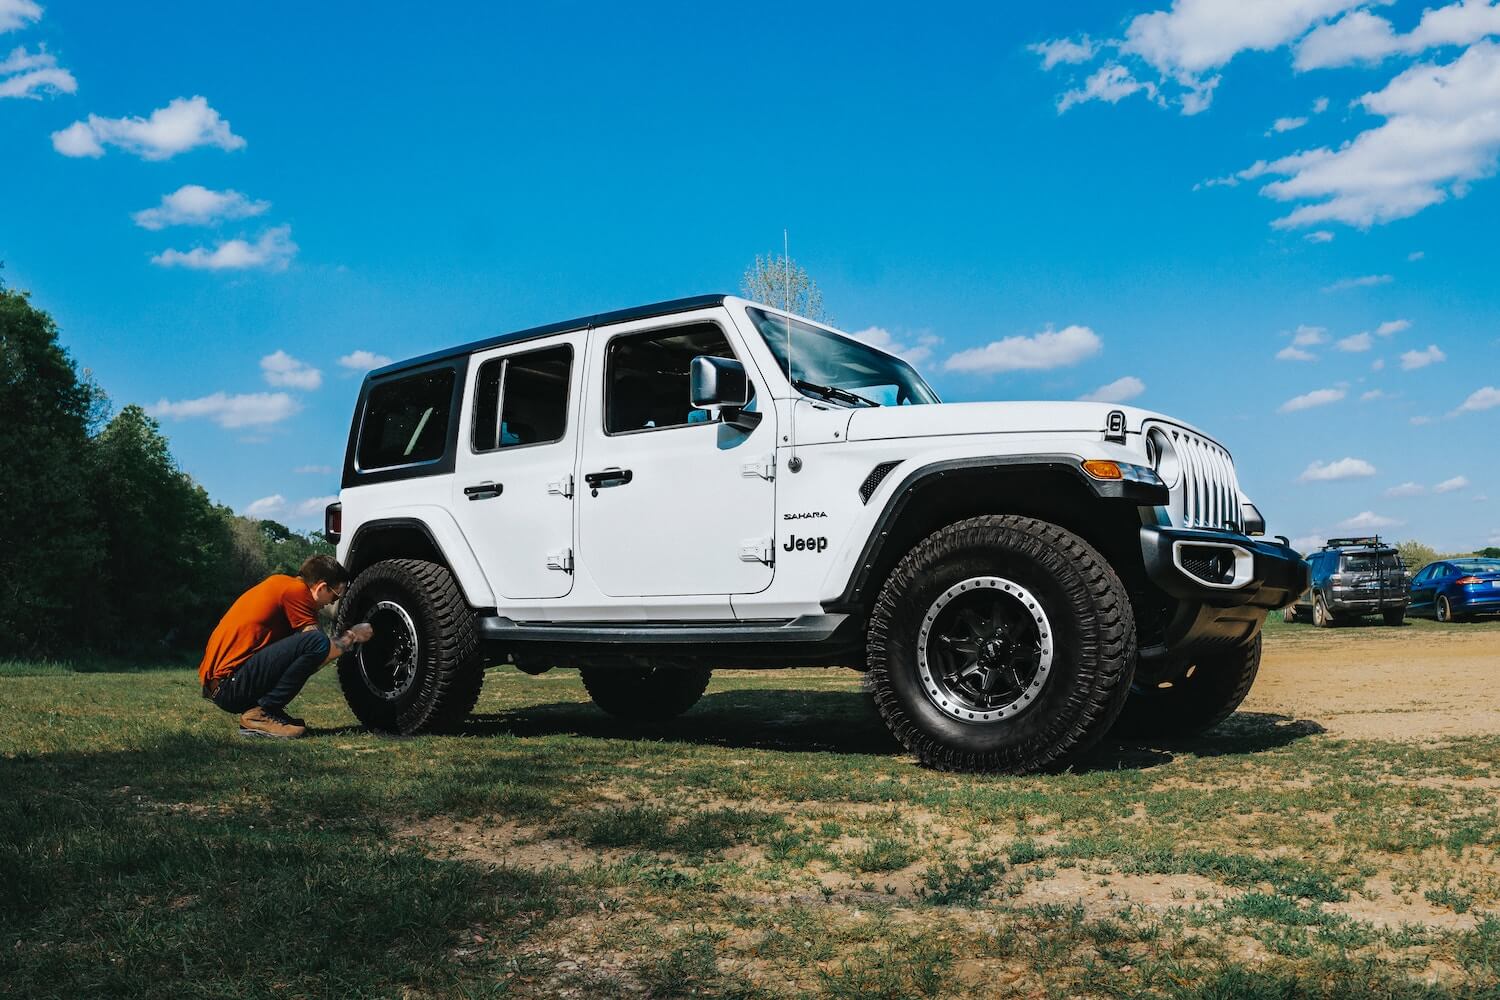 A woman crouches by a white Jeep Wrangler SUV to adjust its tire pressure, a field and blue sky visible in the background.